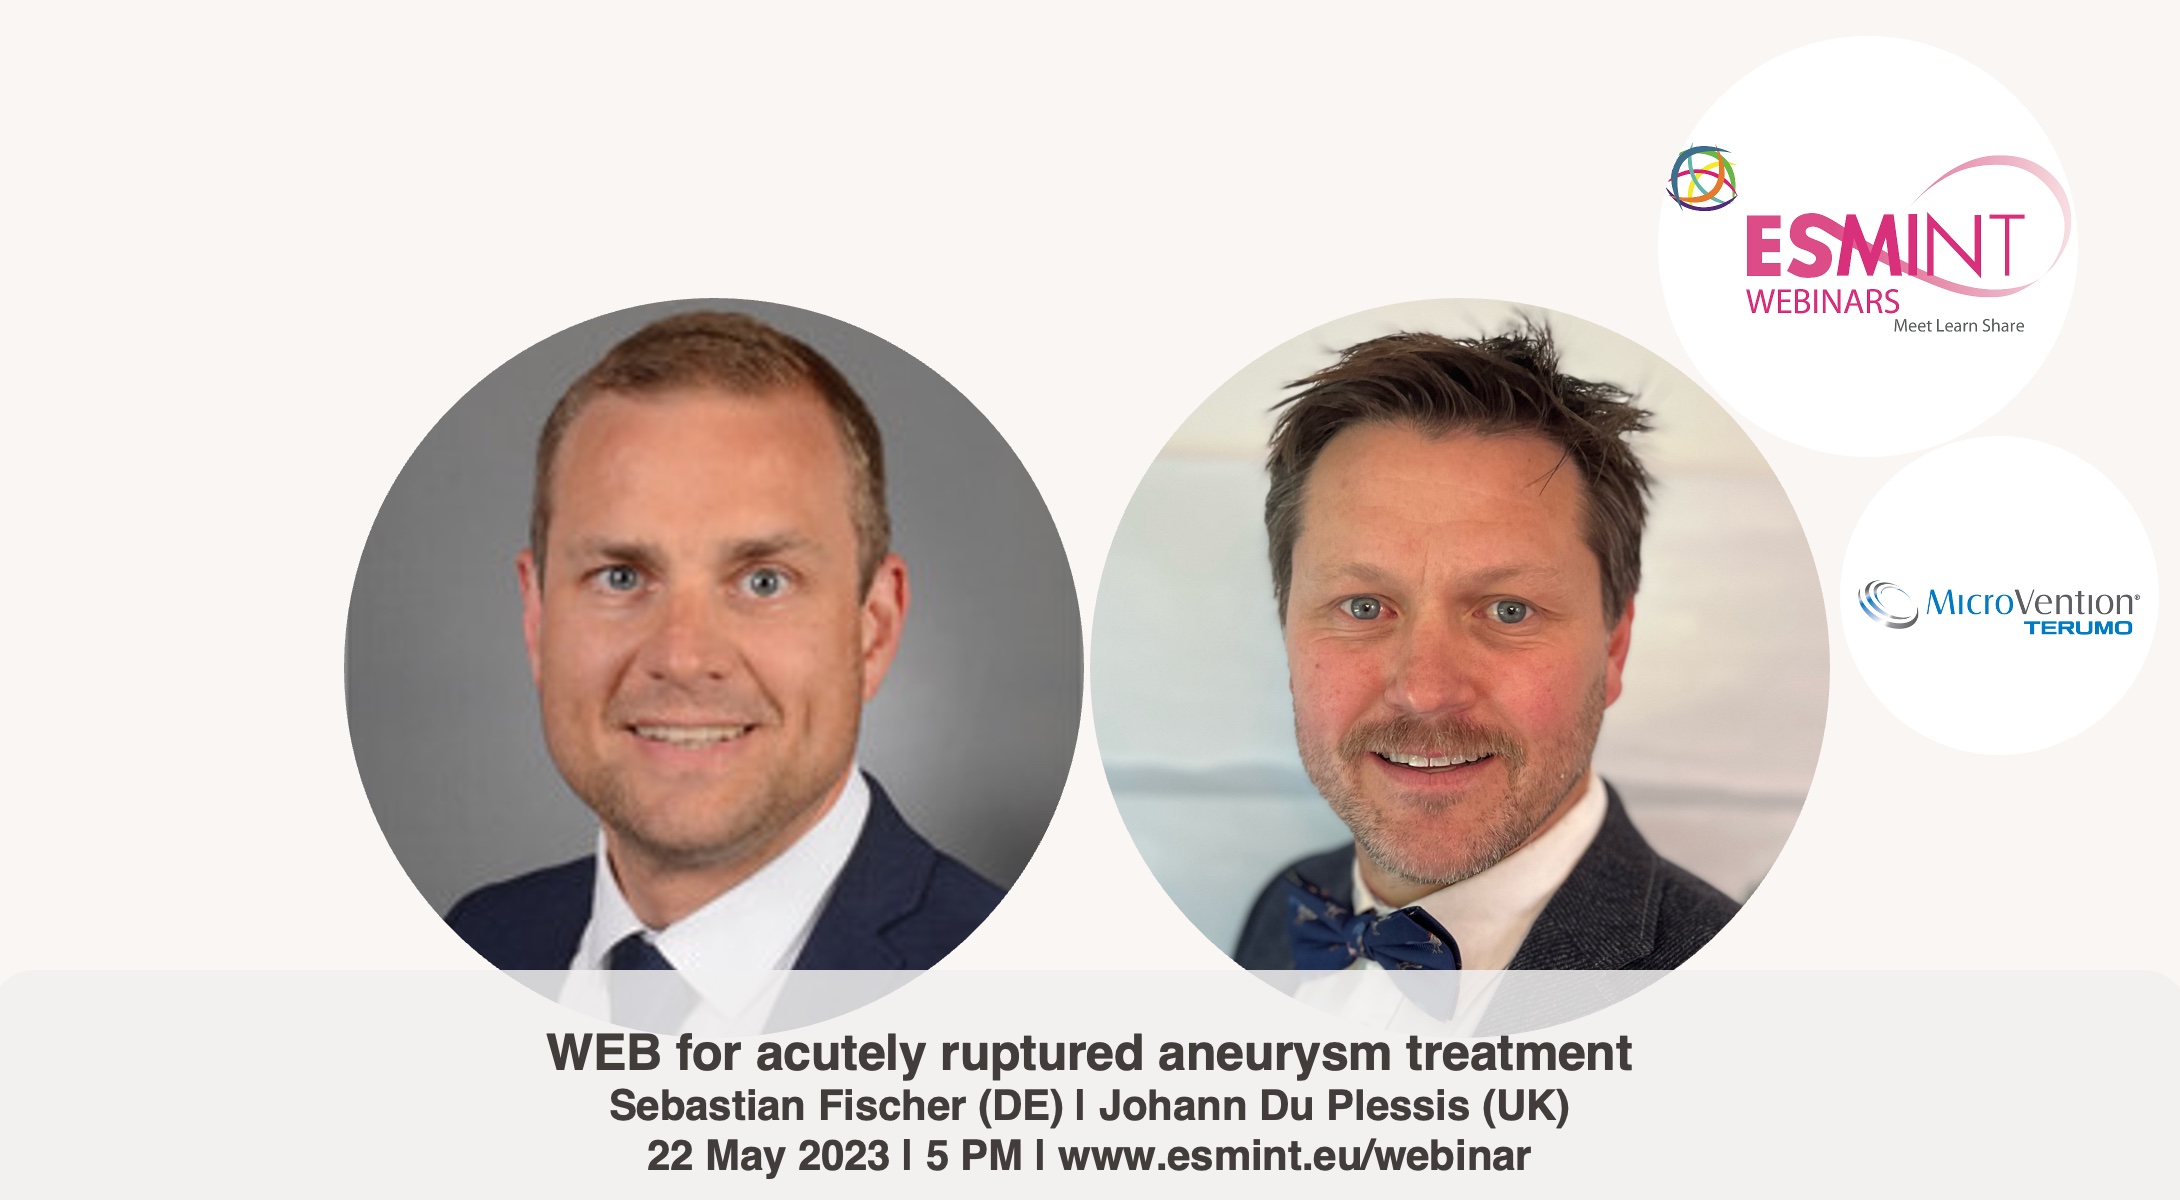 Webinar about WEB with Dr. Fischer and Dr. Du Plessis supported by MicroVention.